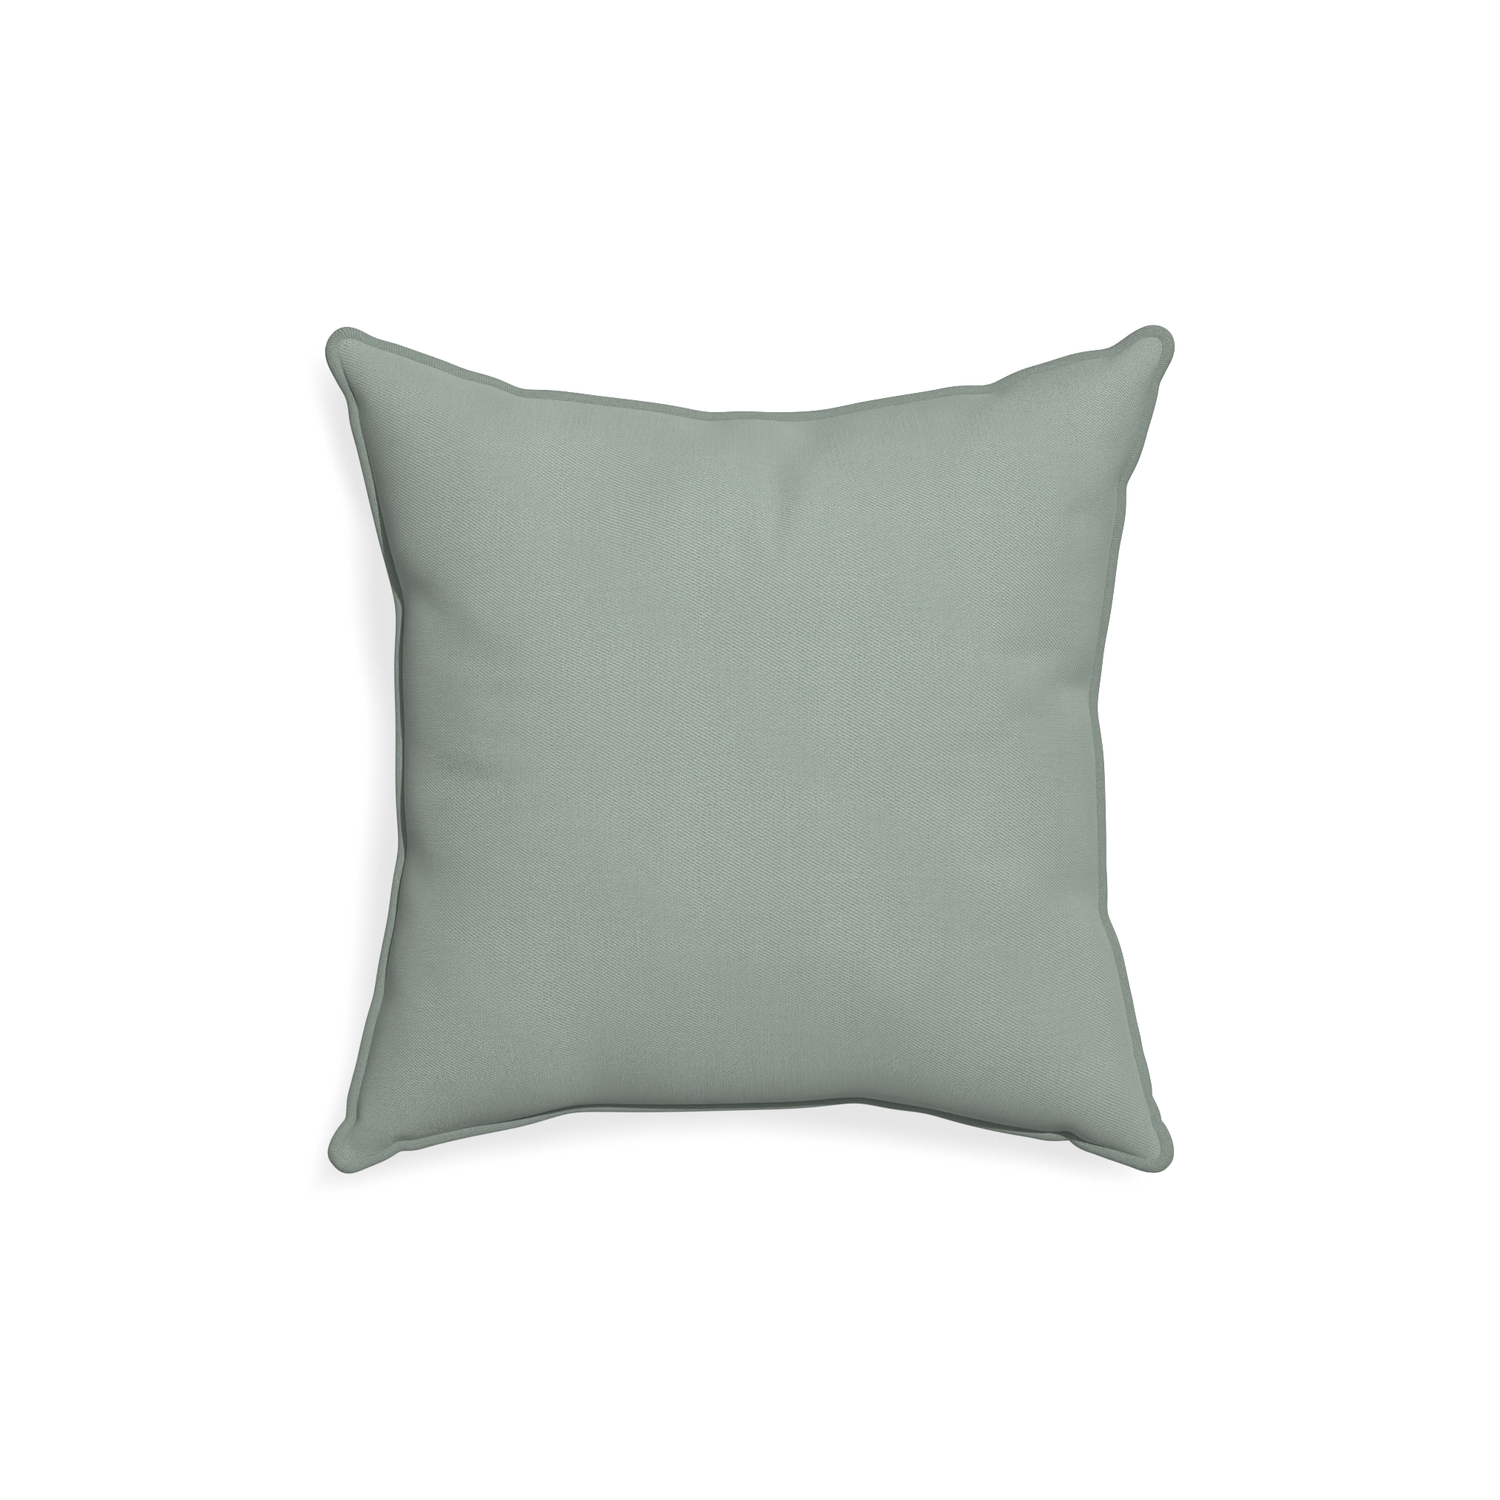 18-square sage custom sage green cottonpillow with sage piping on white background